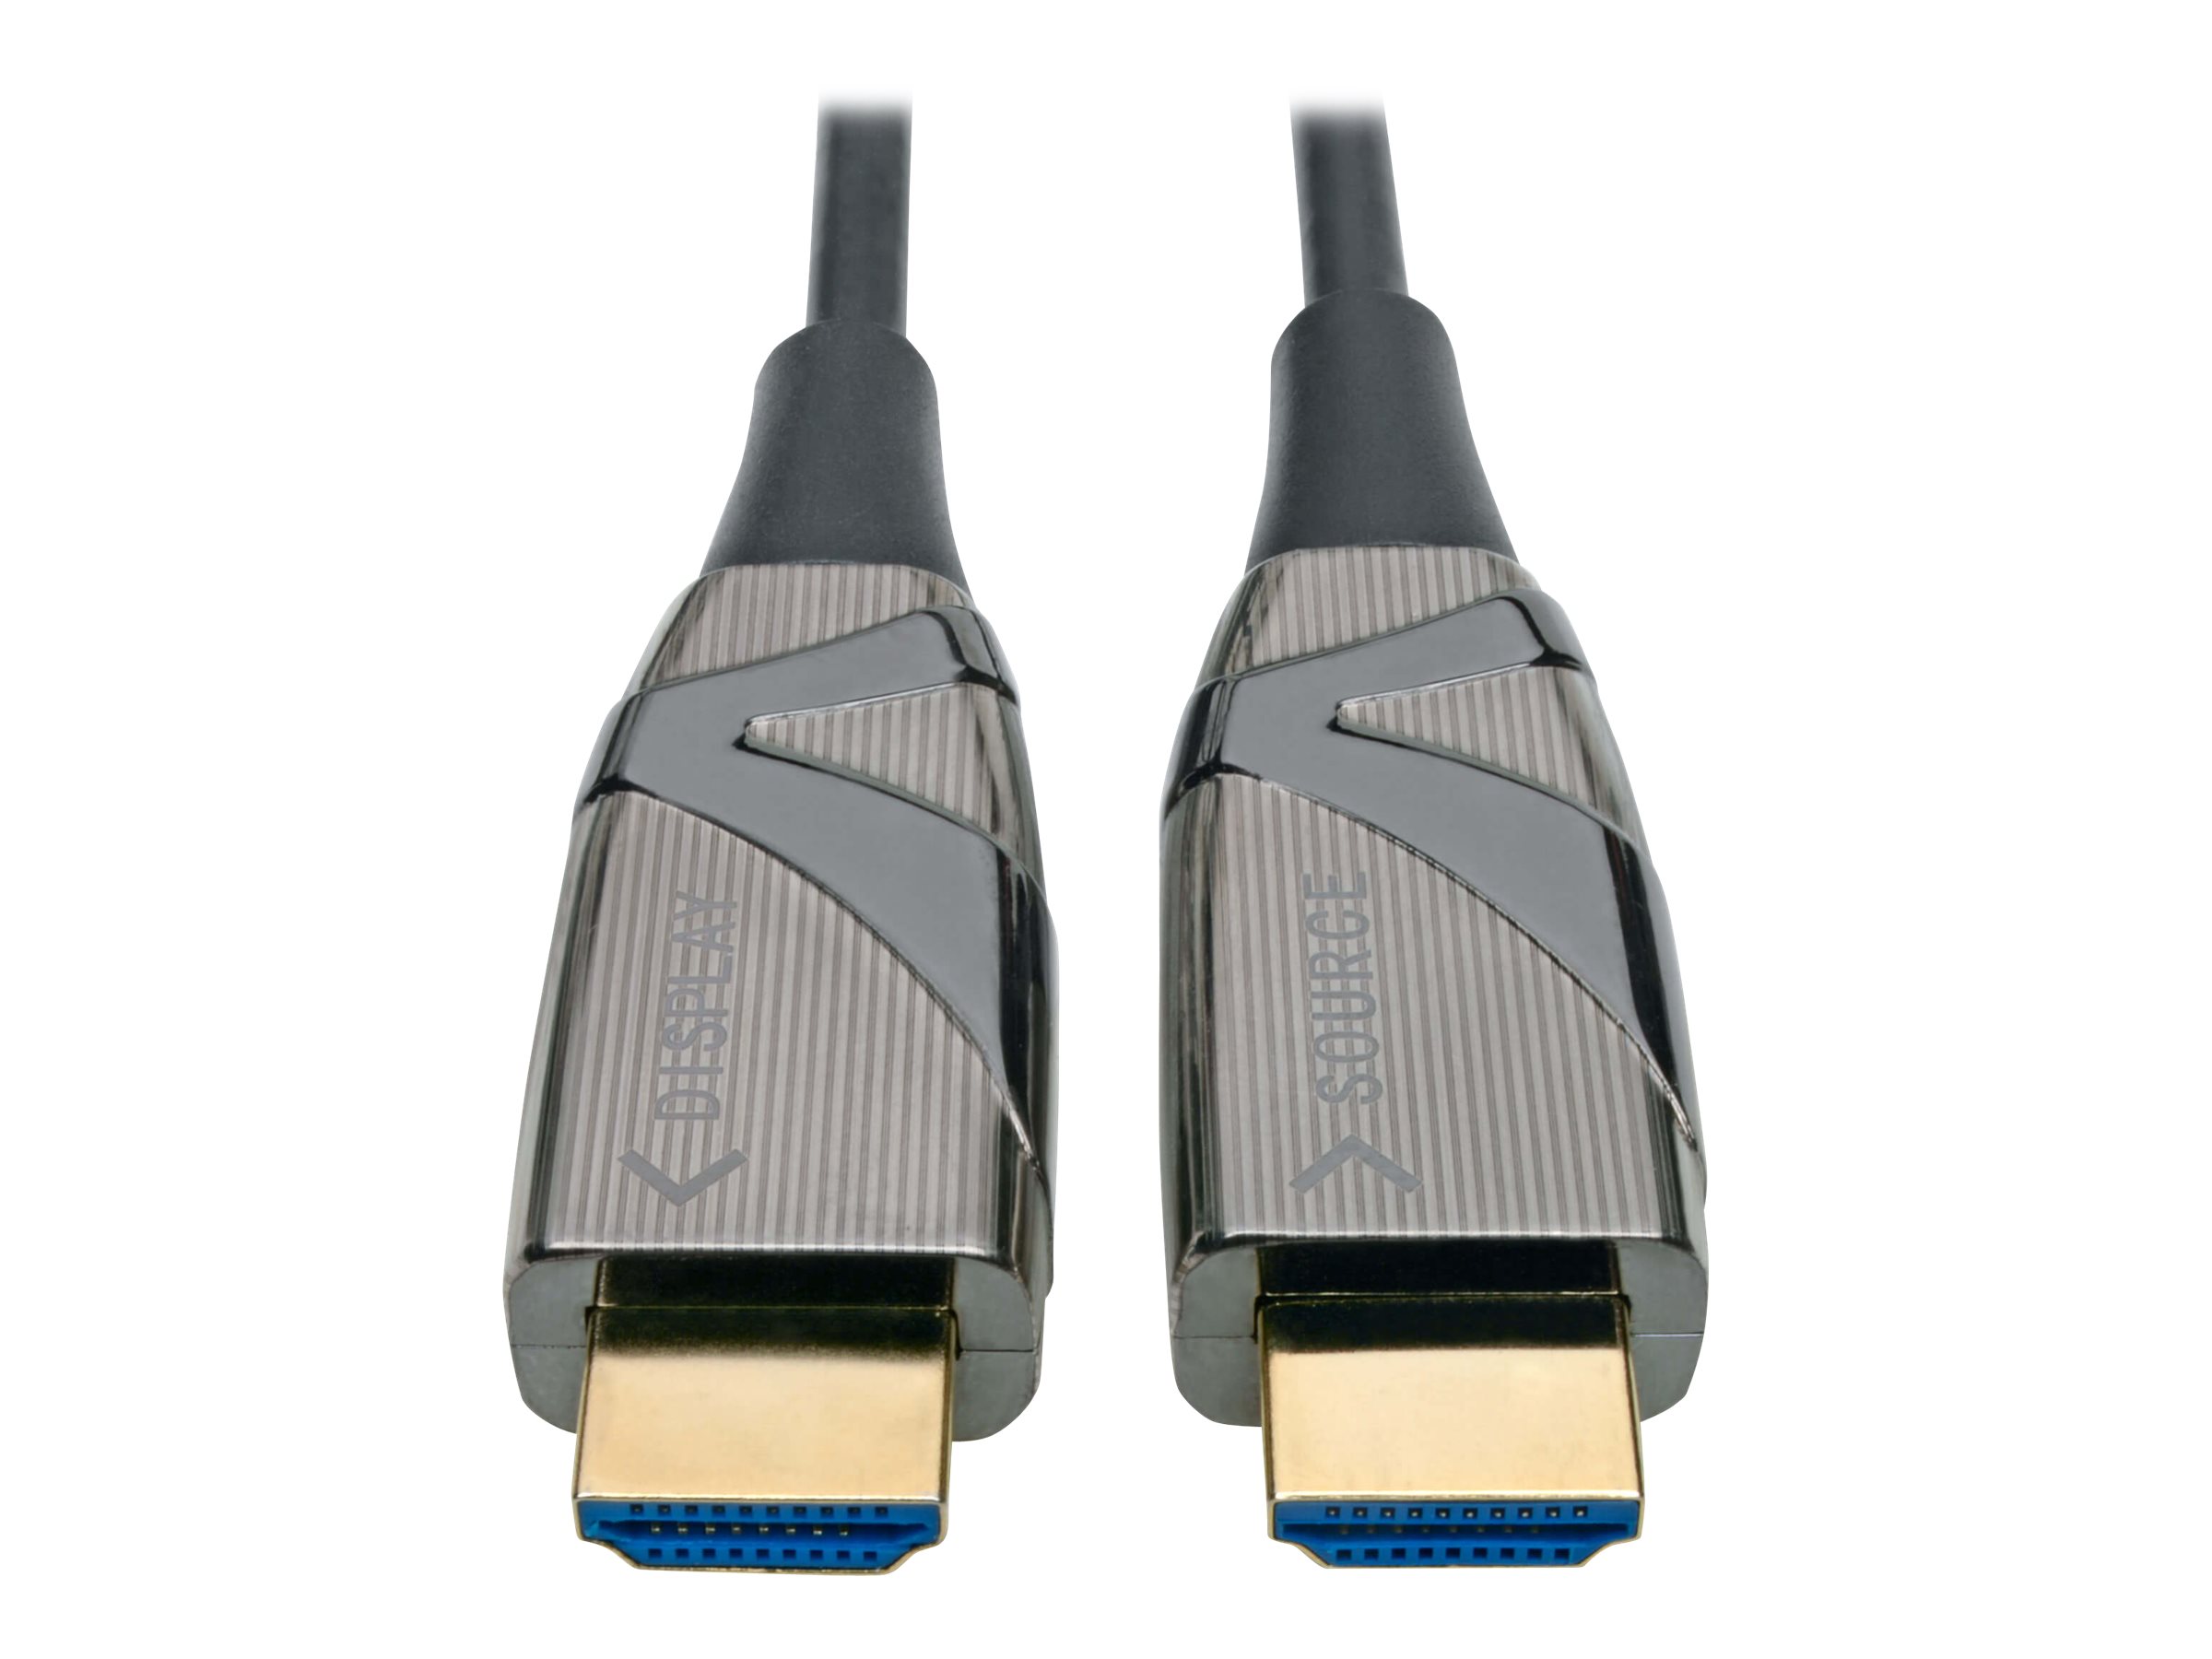 HDMI Cable, 20 Meter High Speed HDMI Cable